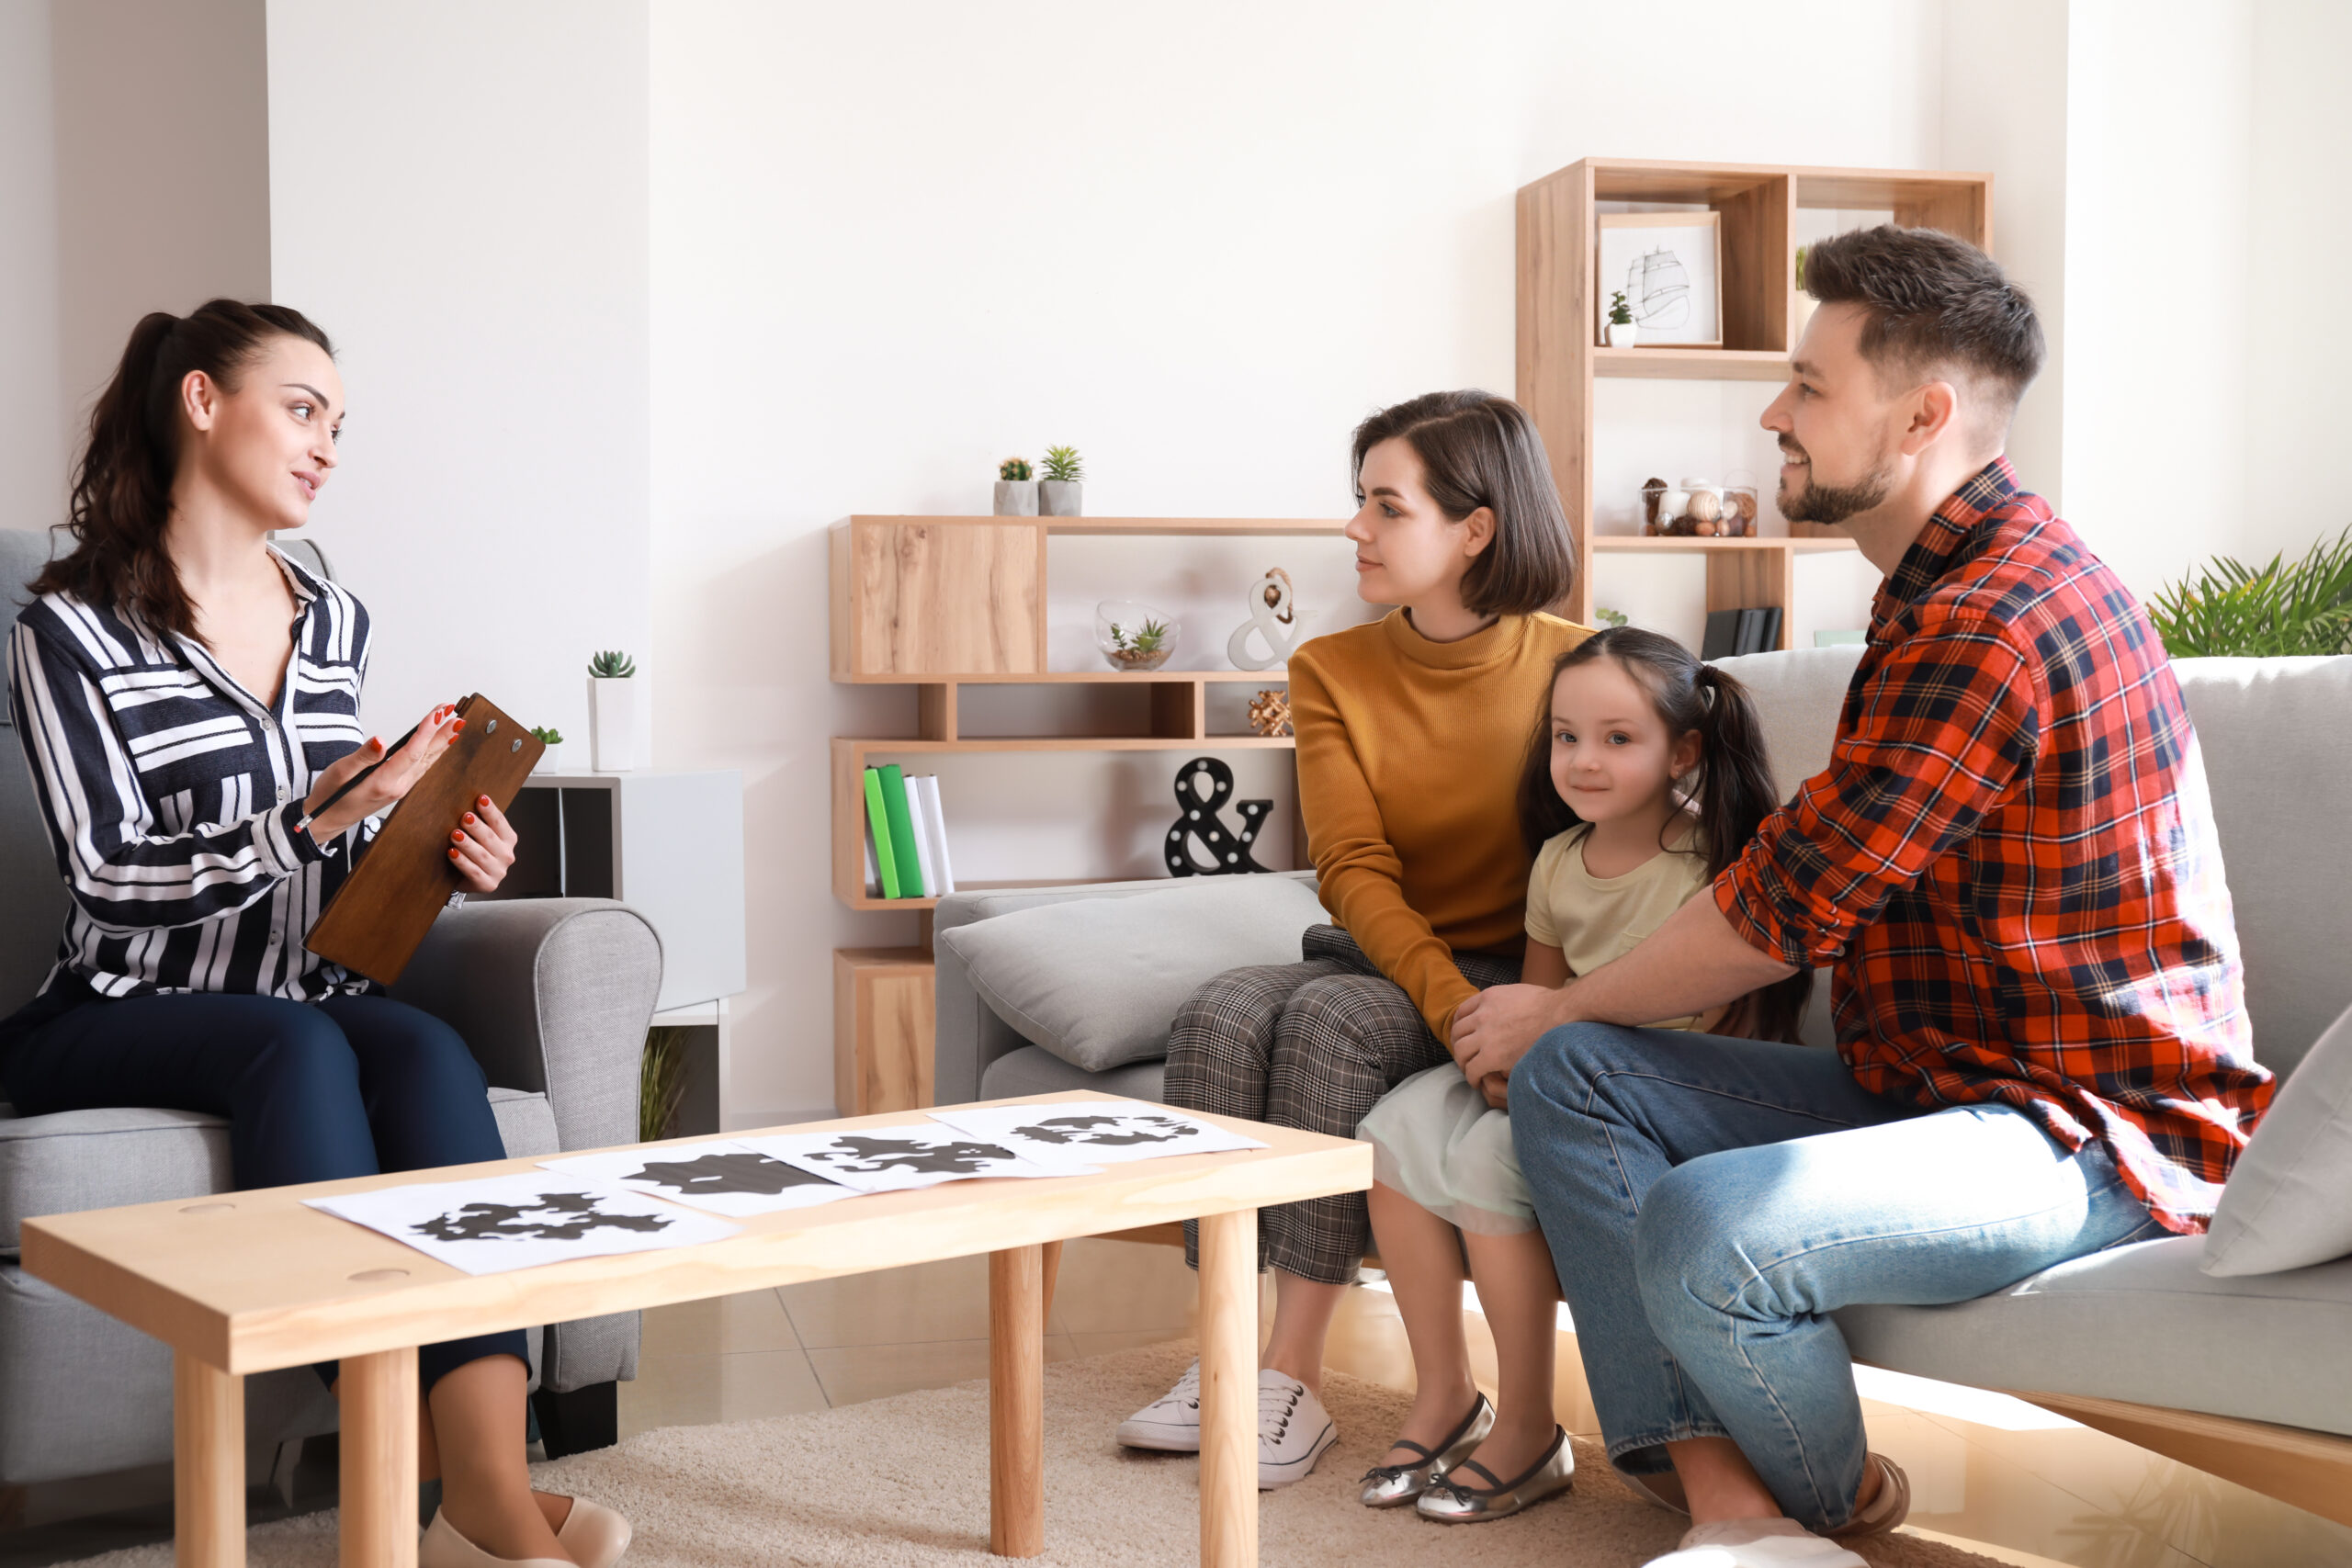 A woman holding a clipboard sits on a chair and speaks to a family of three seated on a couch. The family includes a man, a woman, and a young girl. They are in a living room with wooden shelves, books, and plants in the background.